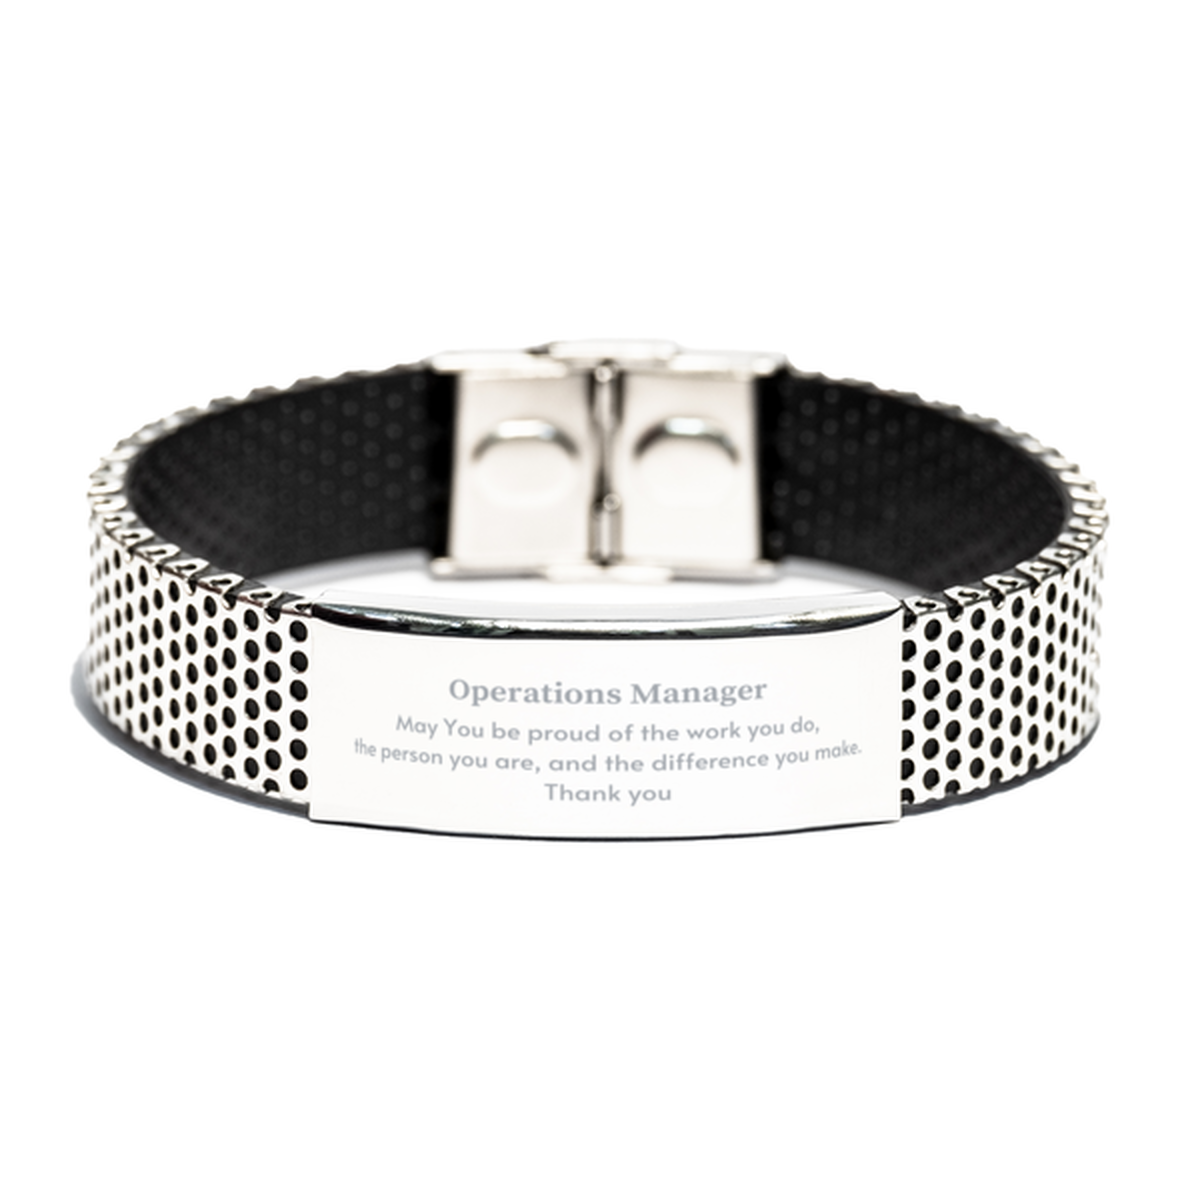 Heartwarming Stainless Steel Bracelet Retirement Coworkers Gifts for Operations Manager, Operations Manager May You be proud of the work you do, the person you are Gifts for Boss Men Women Friends